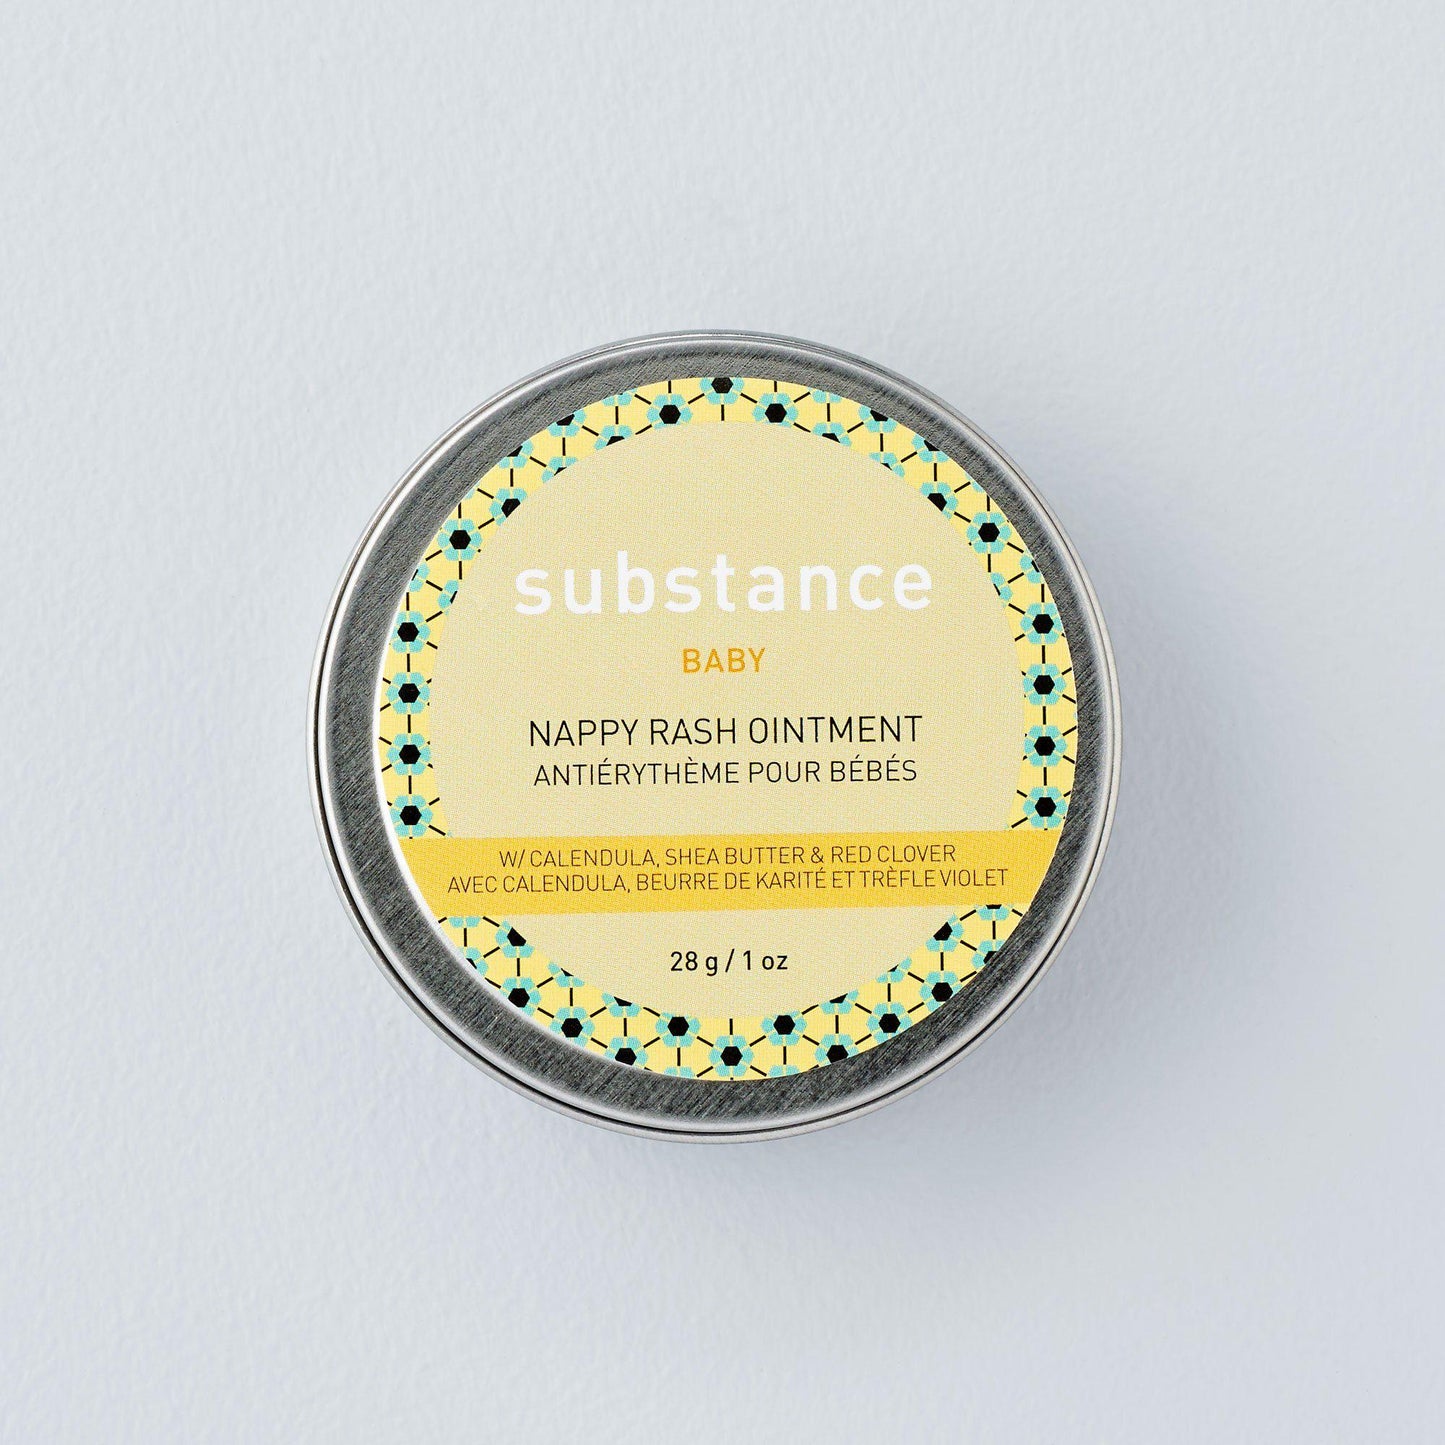 Substance Nappy Ointment Travel Size by Matter